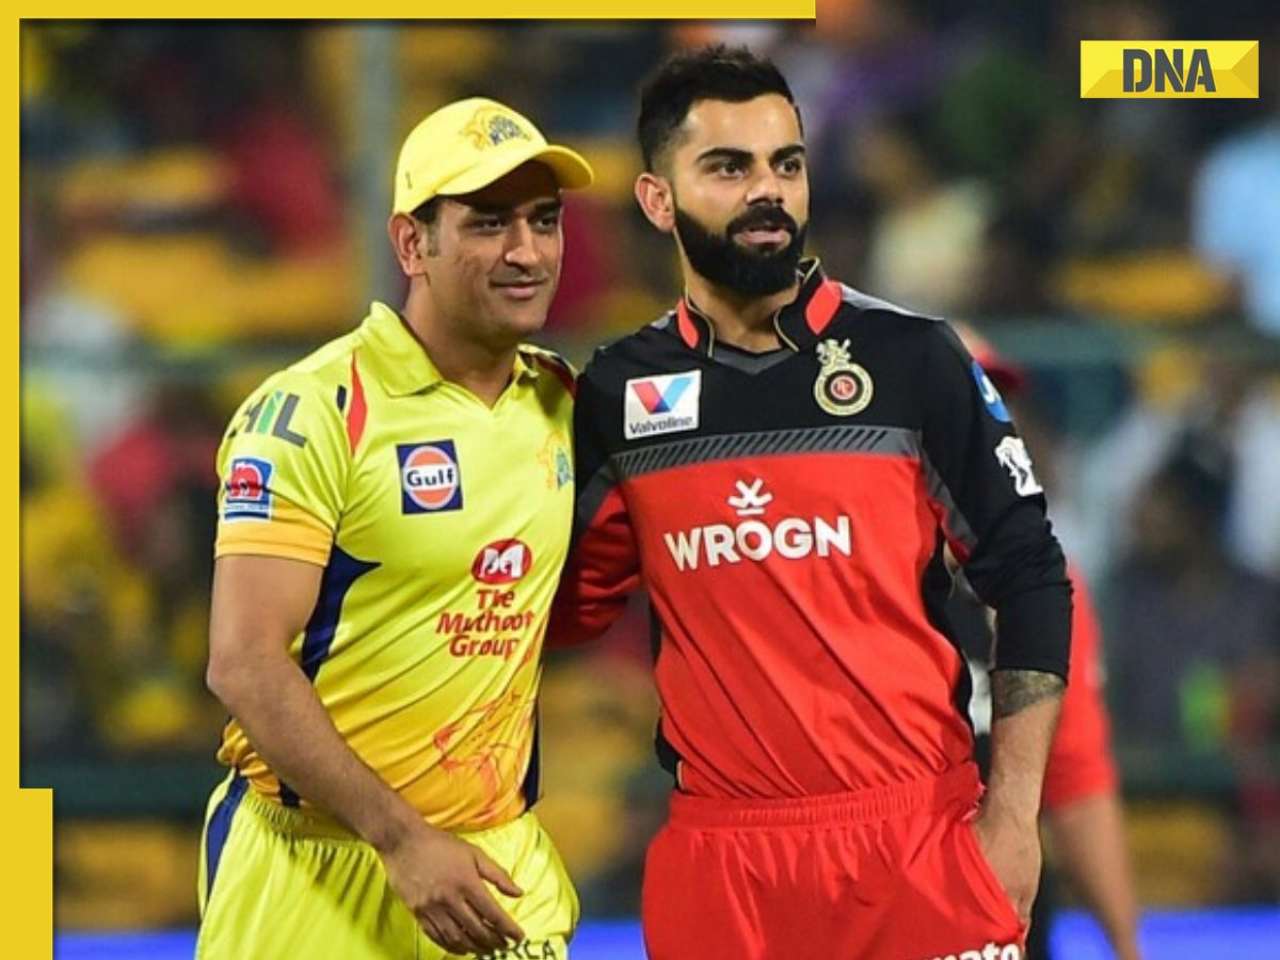 MS Dhoni's 1st IPL auction beats Virat Kohli's pay by whopping 4900%, here how RCB star competed with CSK skipper